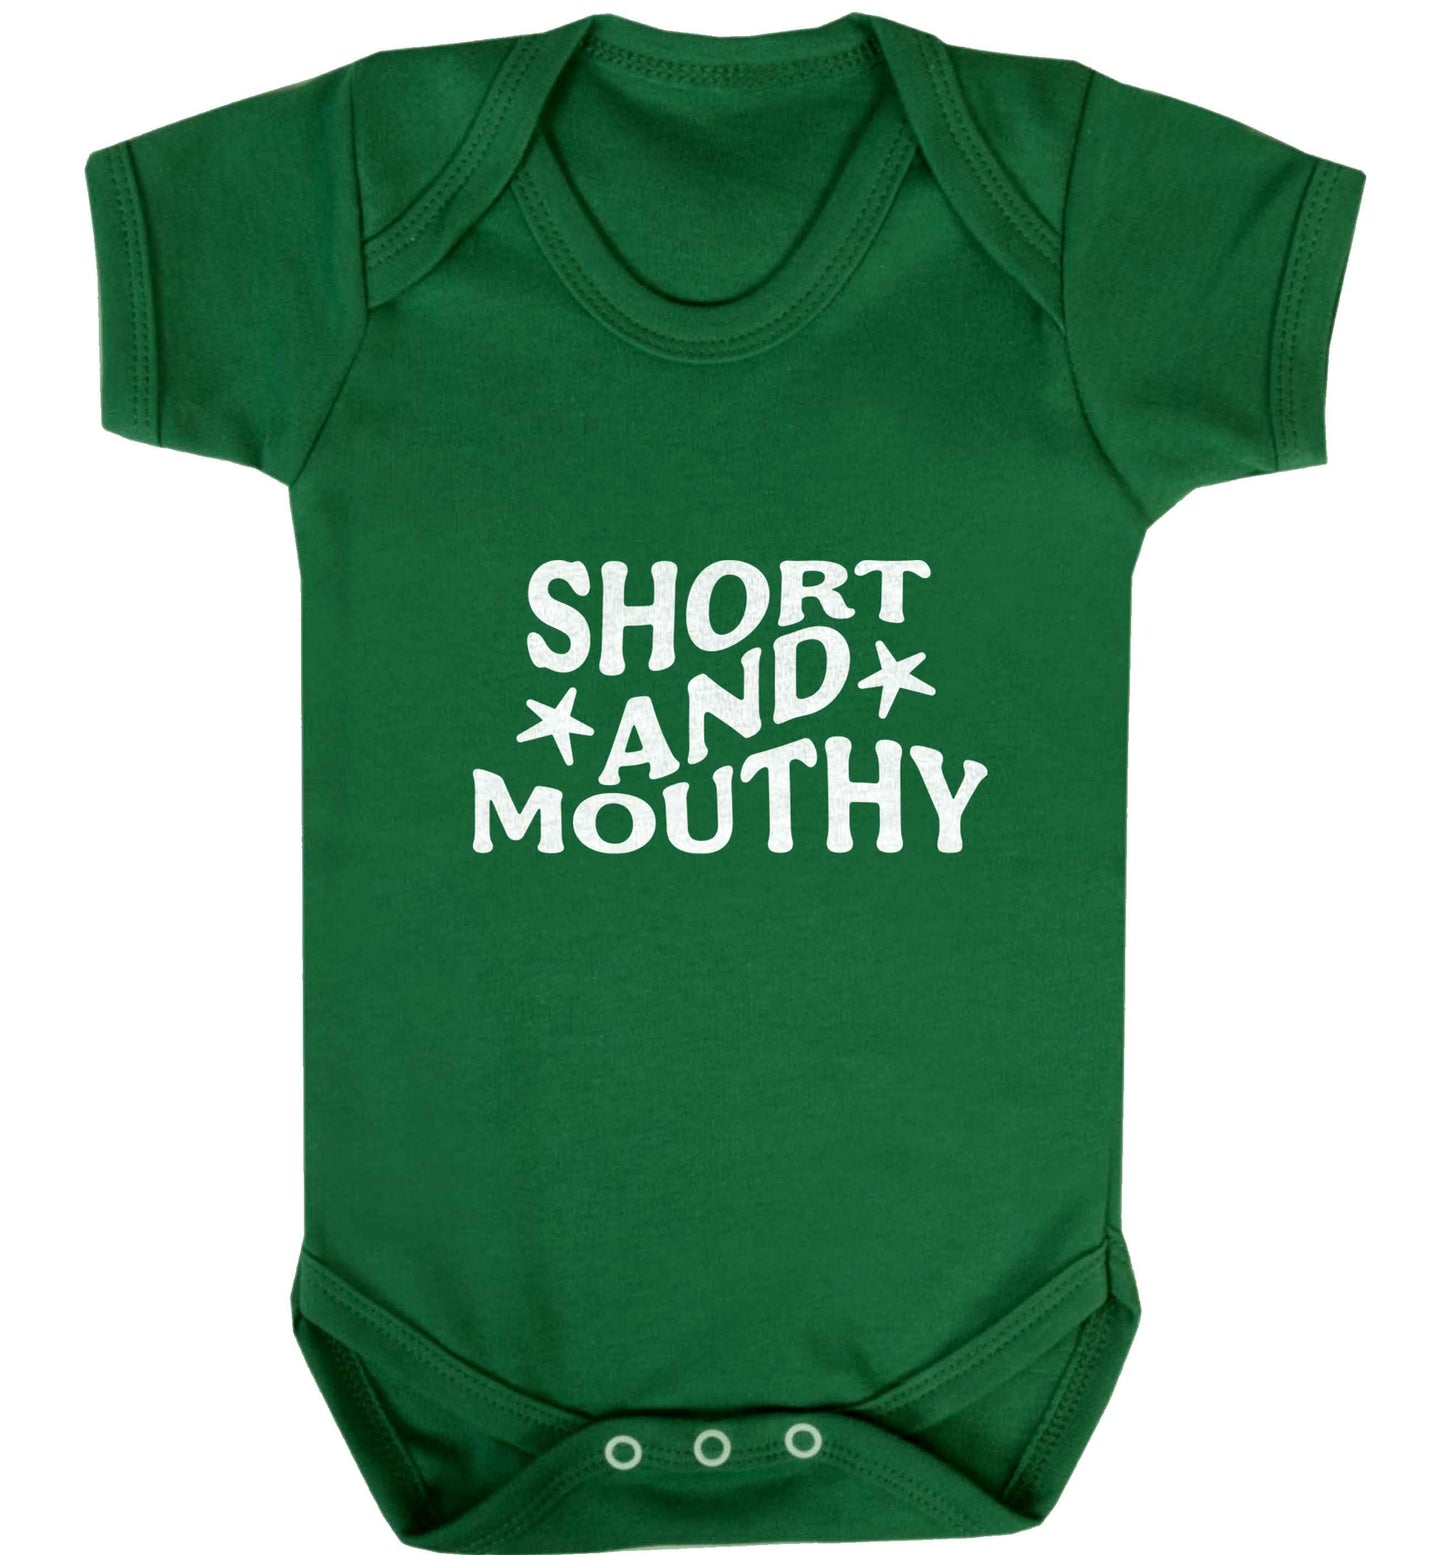 Short and mouthy baby vest green 18-24 months